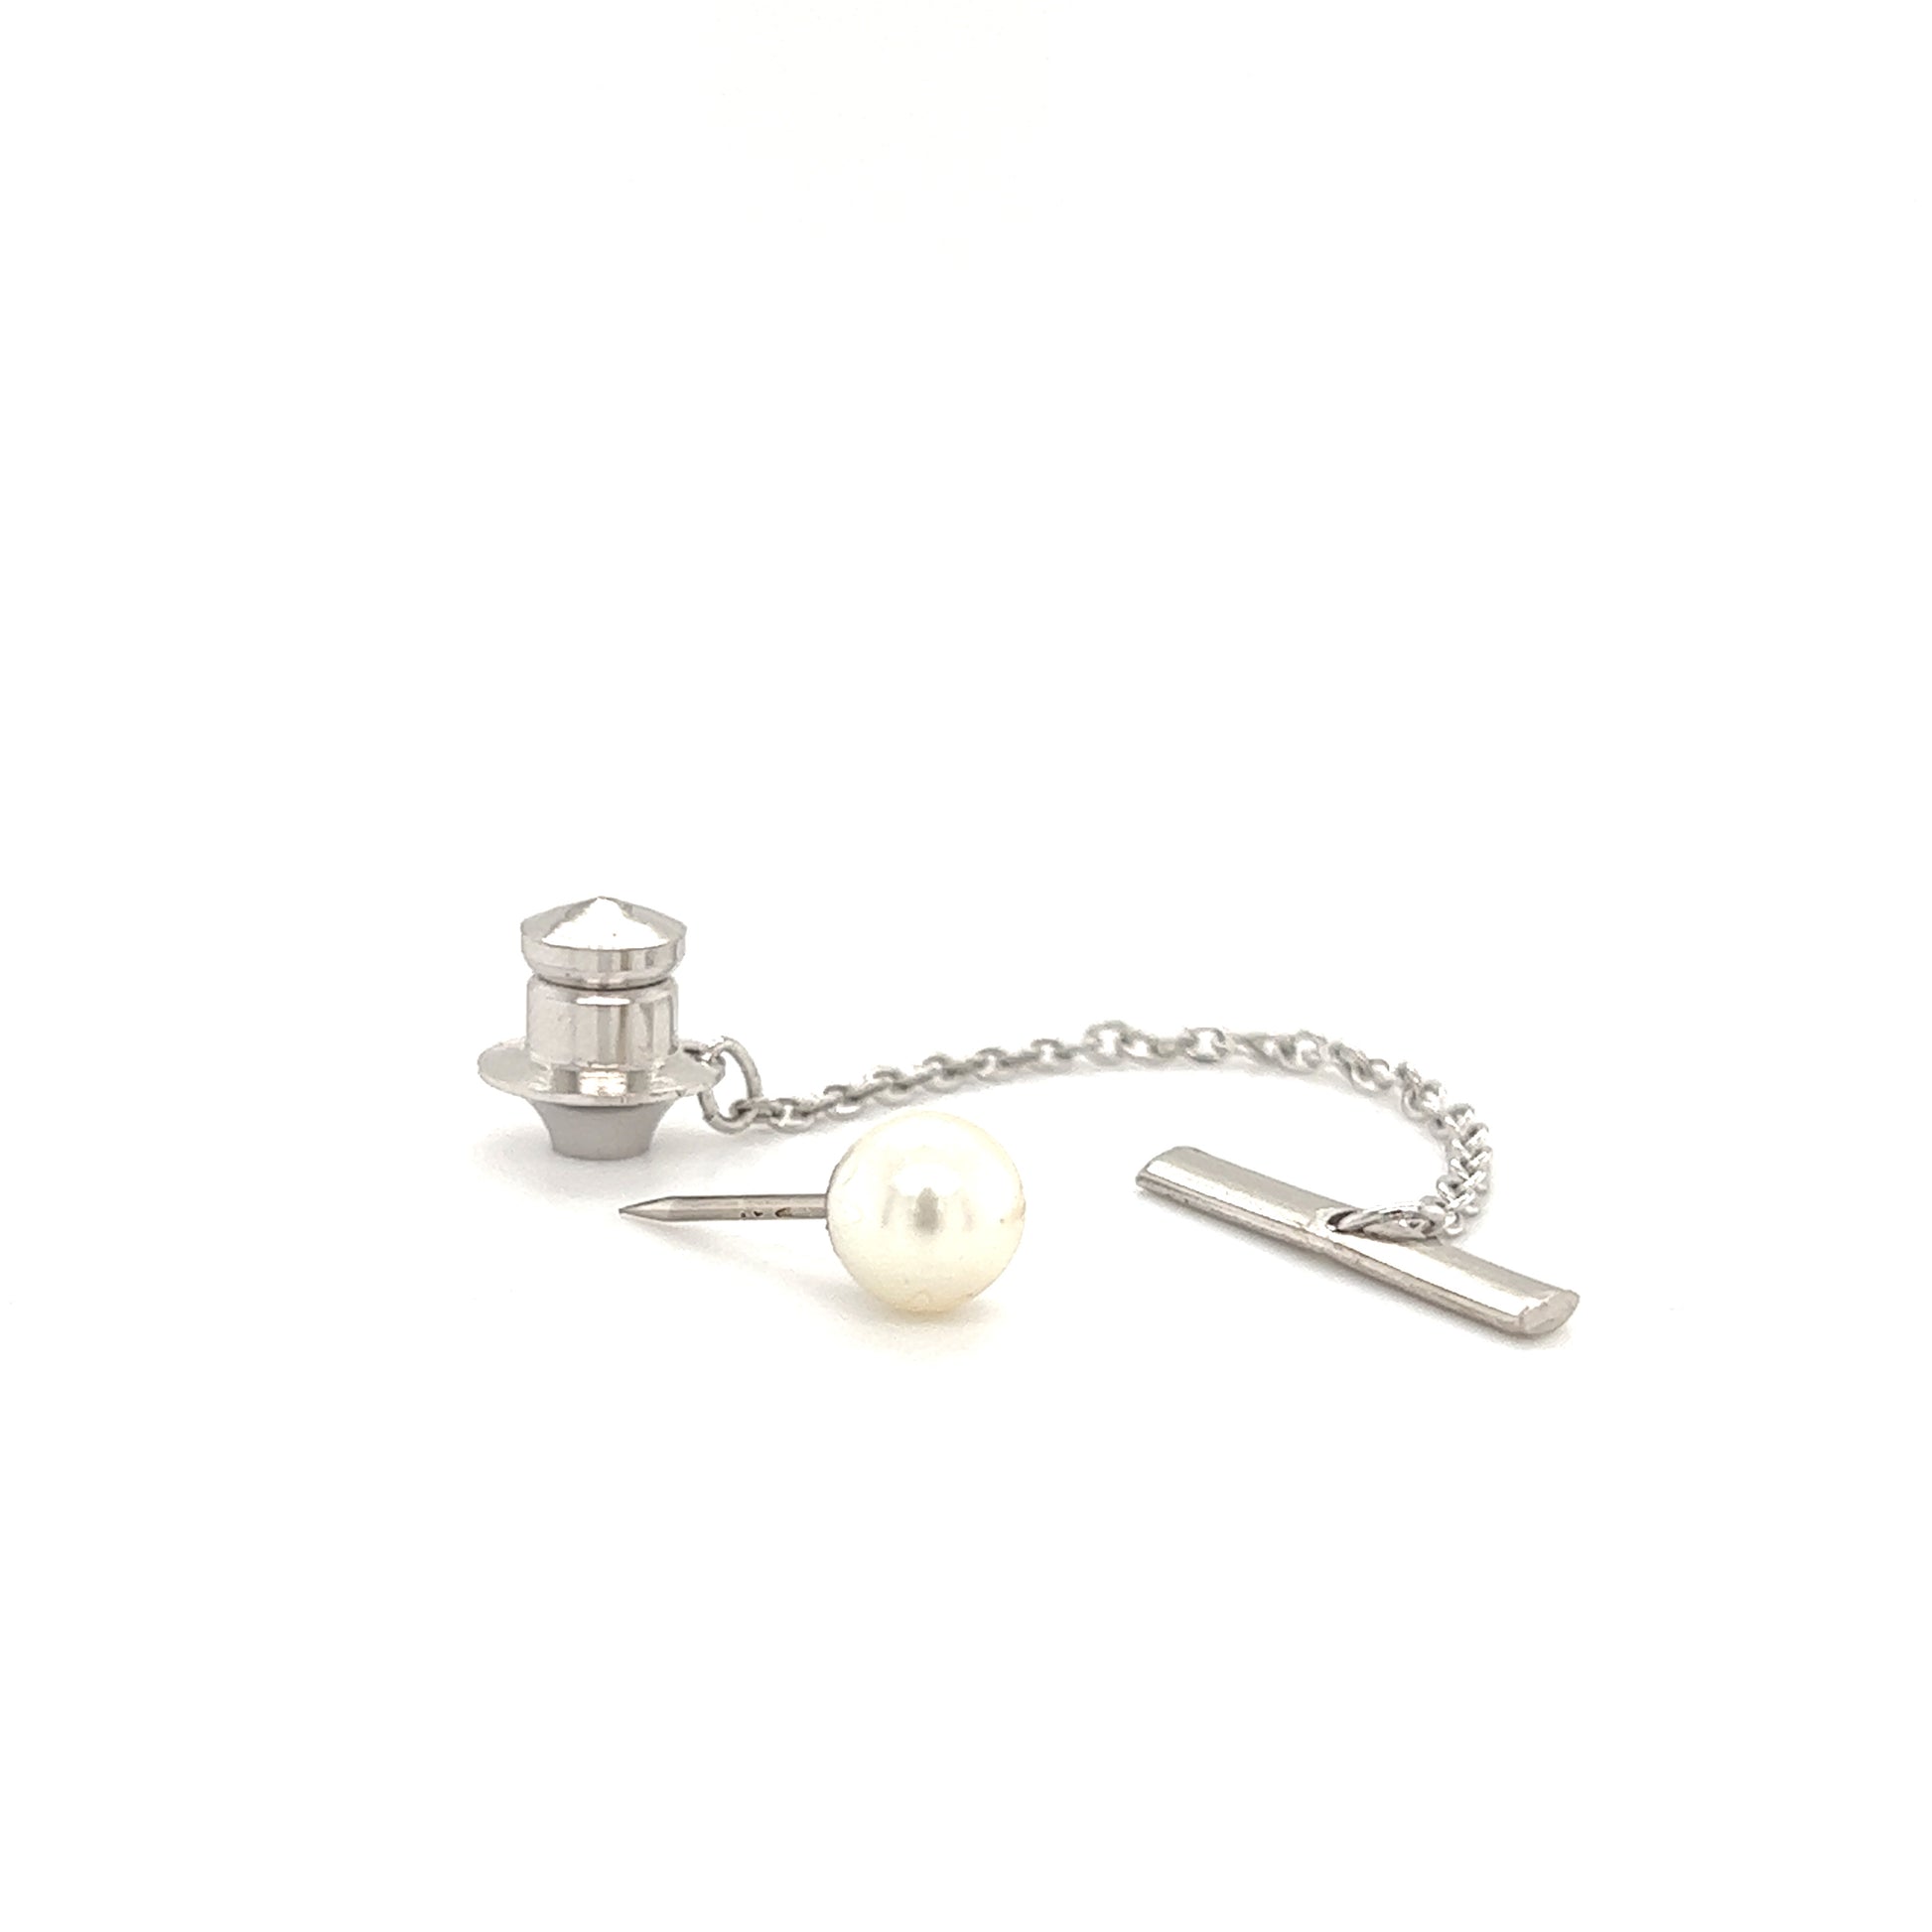 Pin Tie Tack with 6mm White Pearl in Sterling Silver Components View